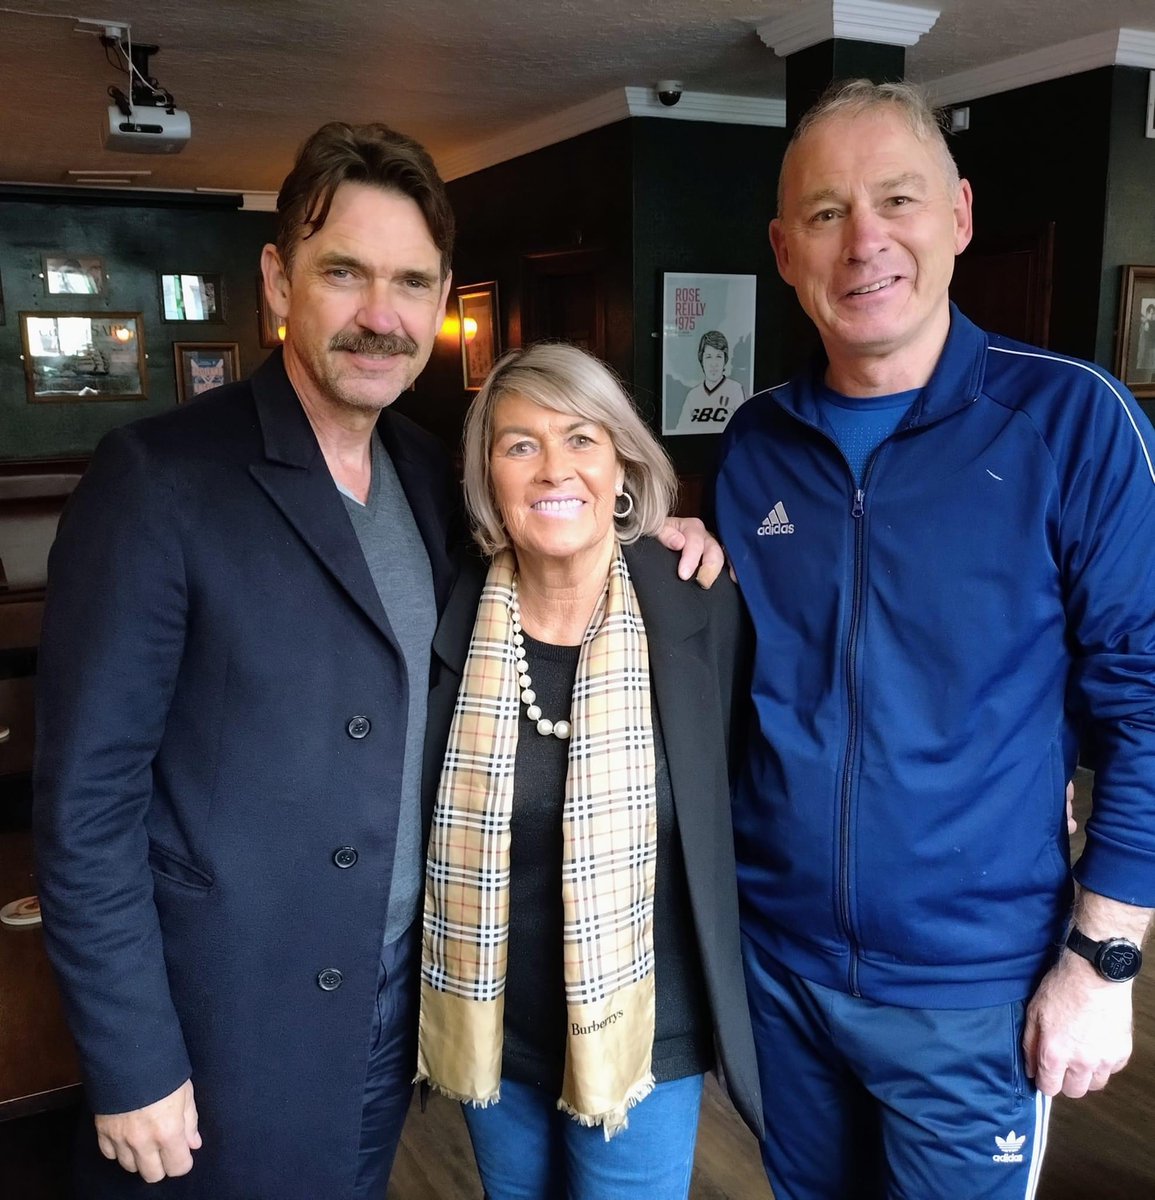 Dougray Scott, Rose Reilly and I today in the Rose Reilly pub in Govanhill,  Glasgow #dougrayscott #rosereilly #scottishfootball  #glasgow